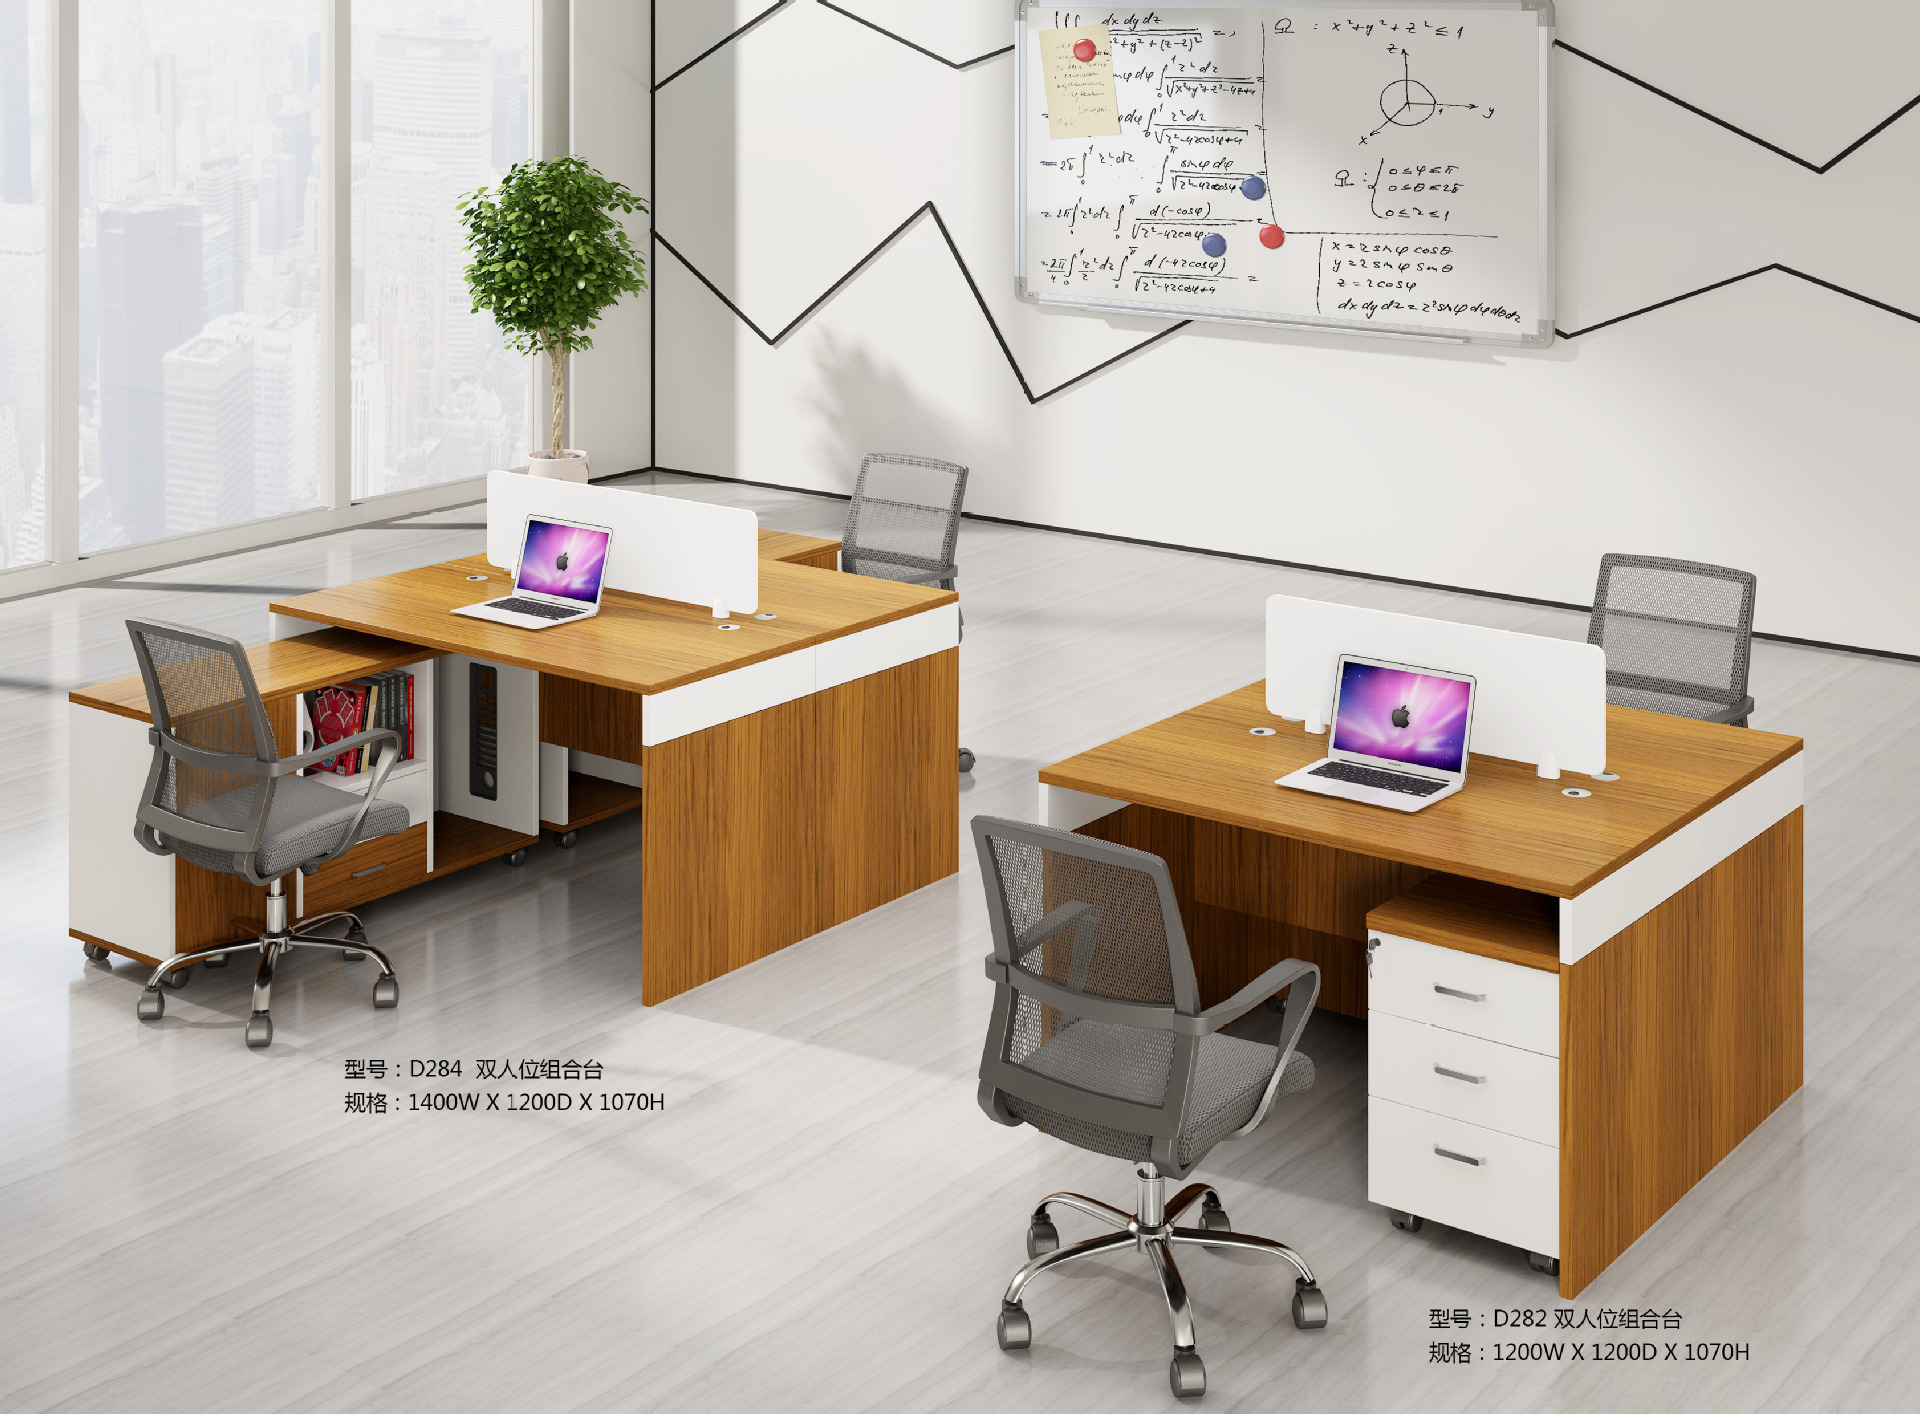 Customized office furniture, modern minimalist card seat partition, computer office desk, staff desk and chair combination